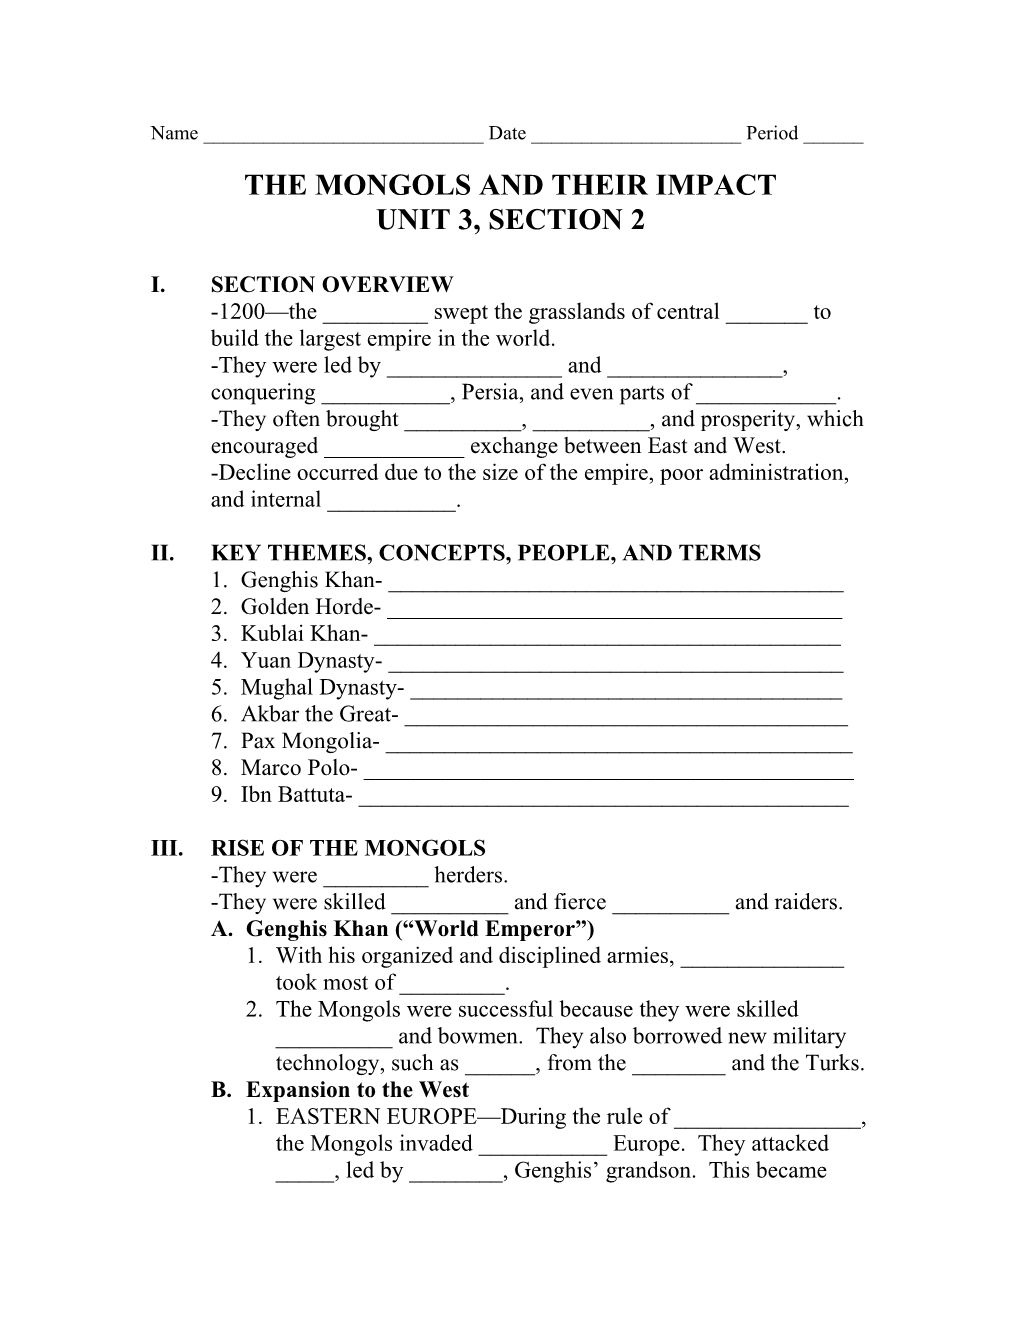 The Mongols and Their Impact